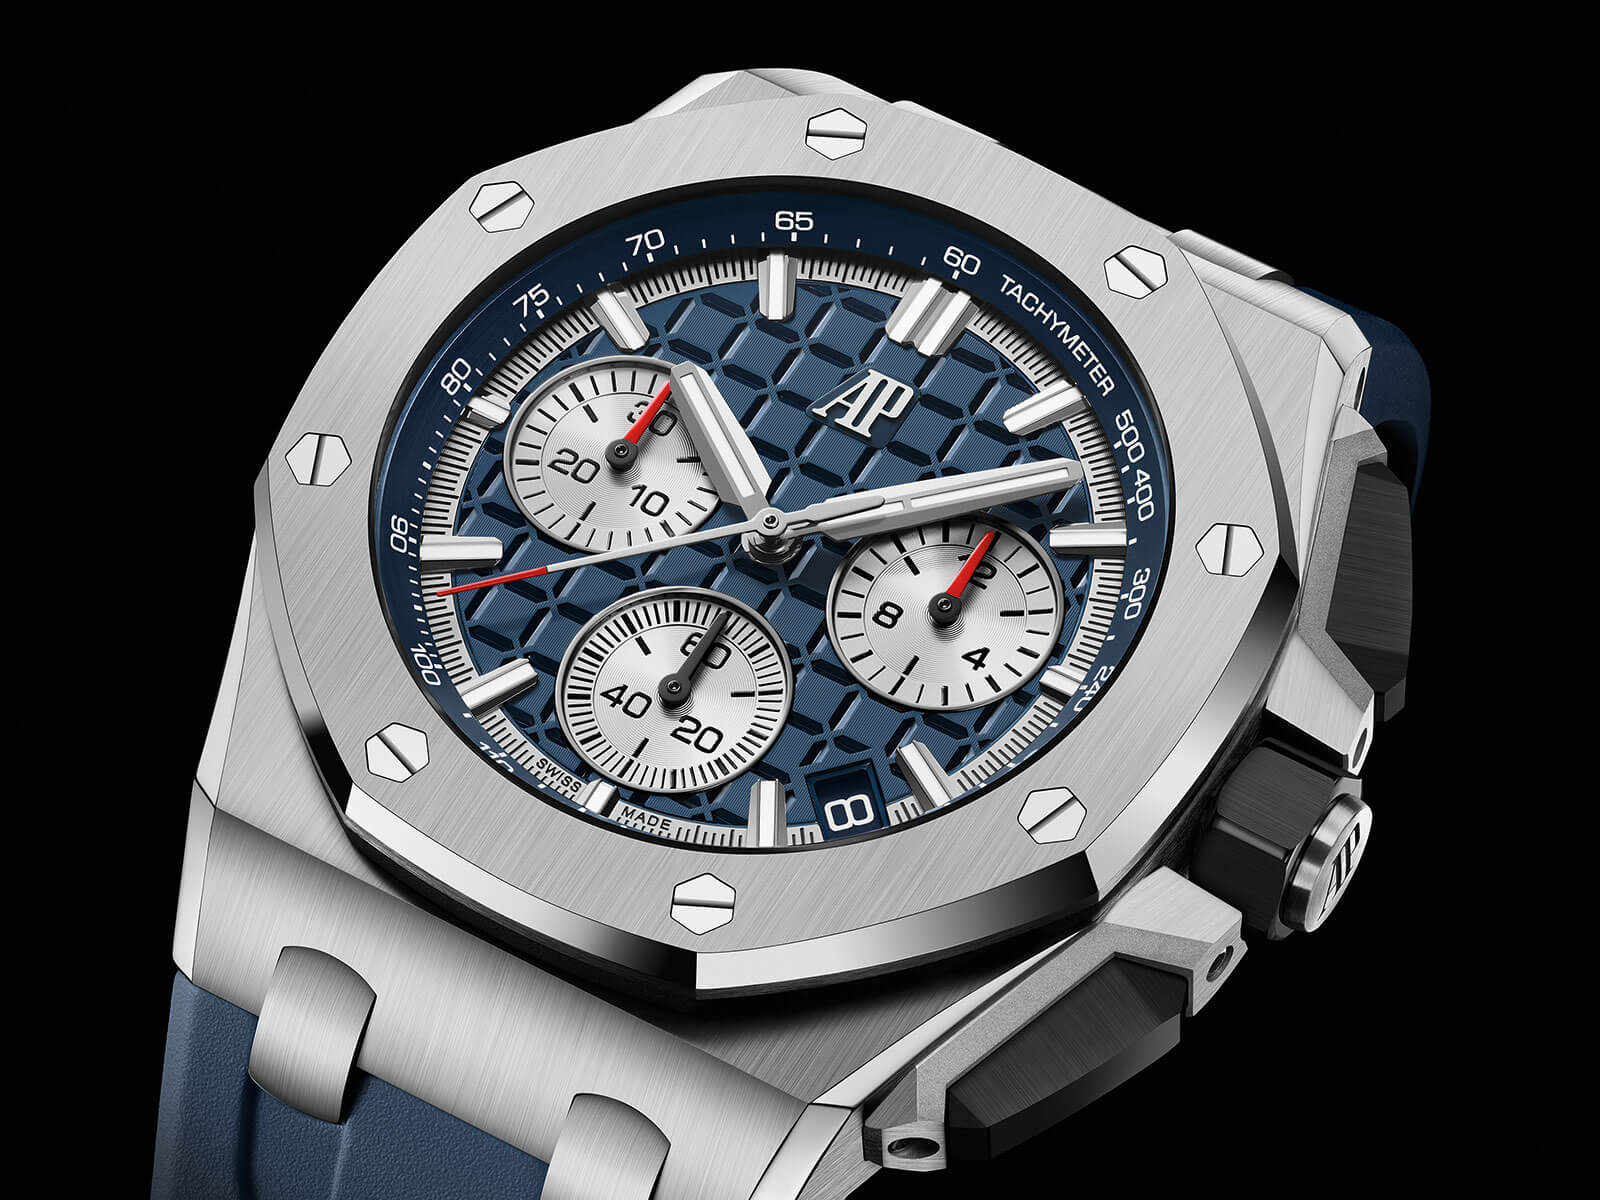 Audemars Piguet Royal Oak Offshore 26420TI.OO.A027CA.01 Chronograph with Flyback Function